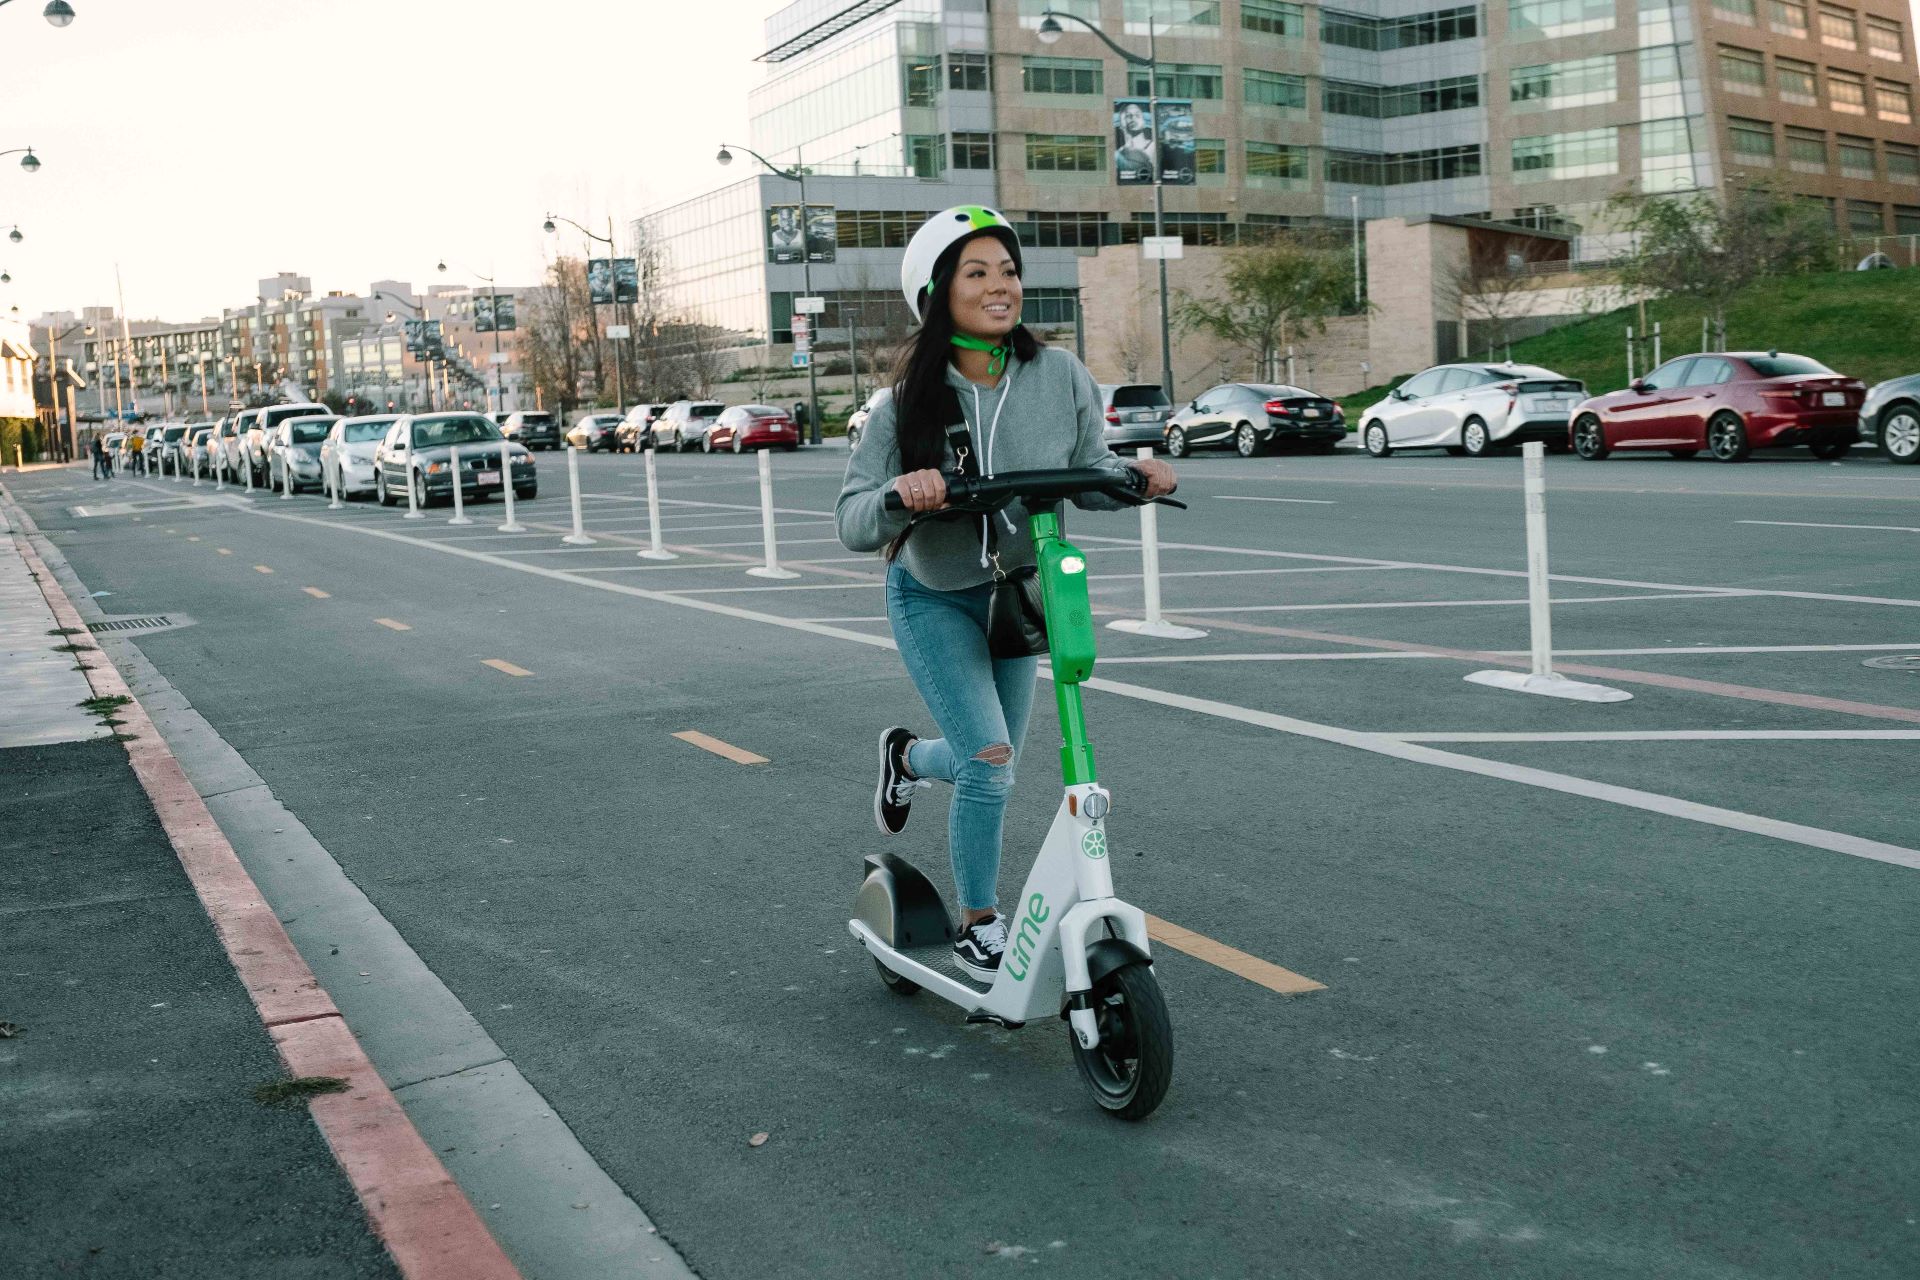 Person riding a Lime scooter in a shared pathway